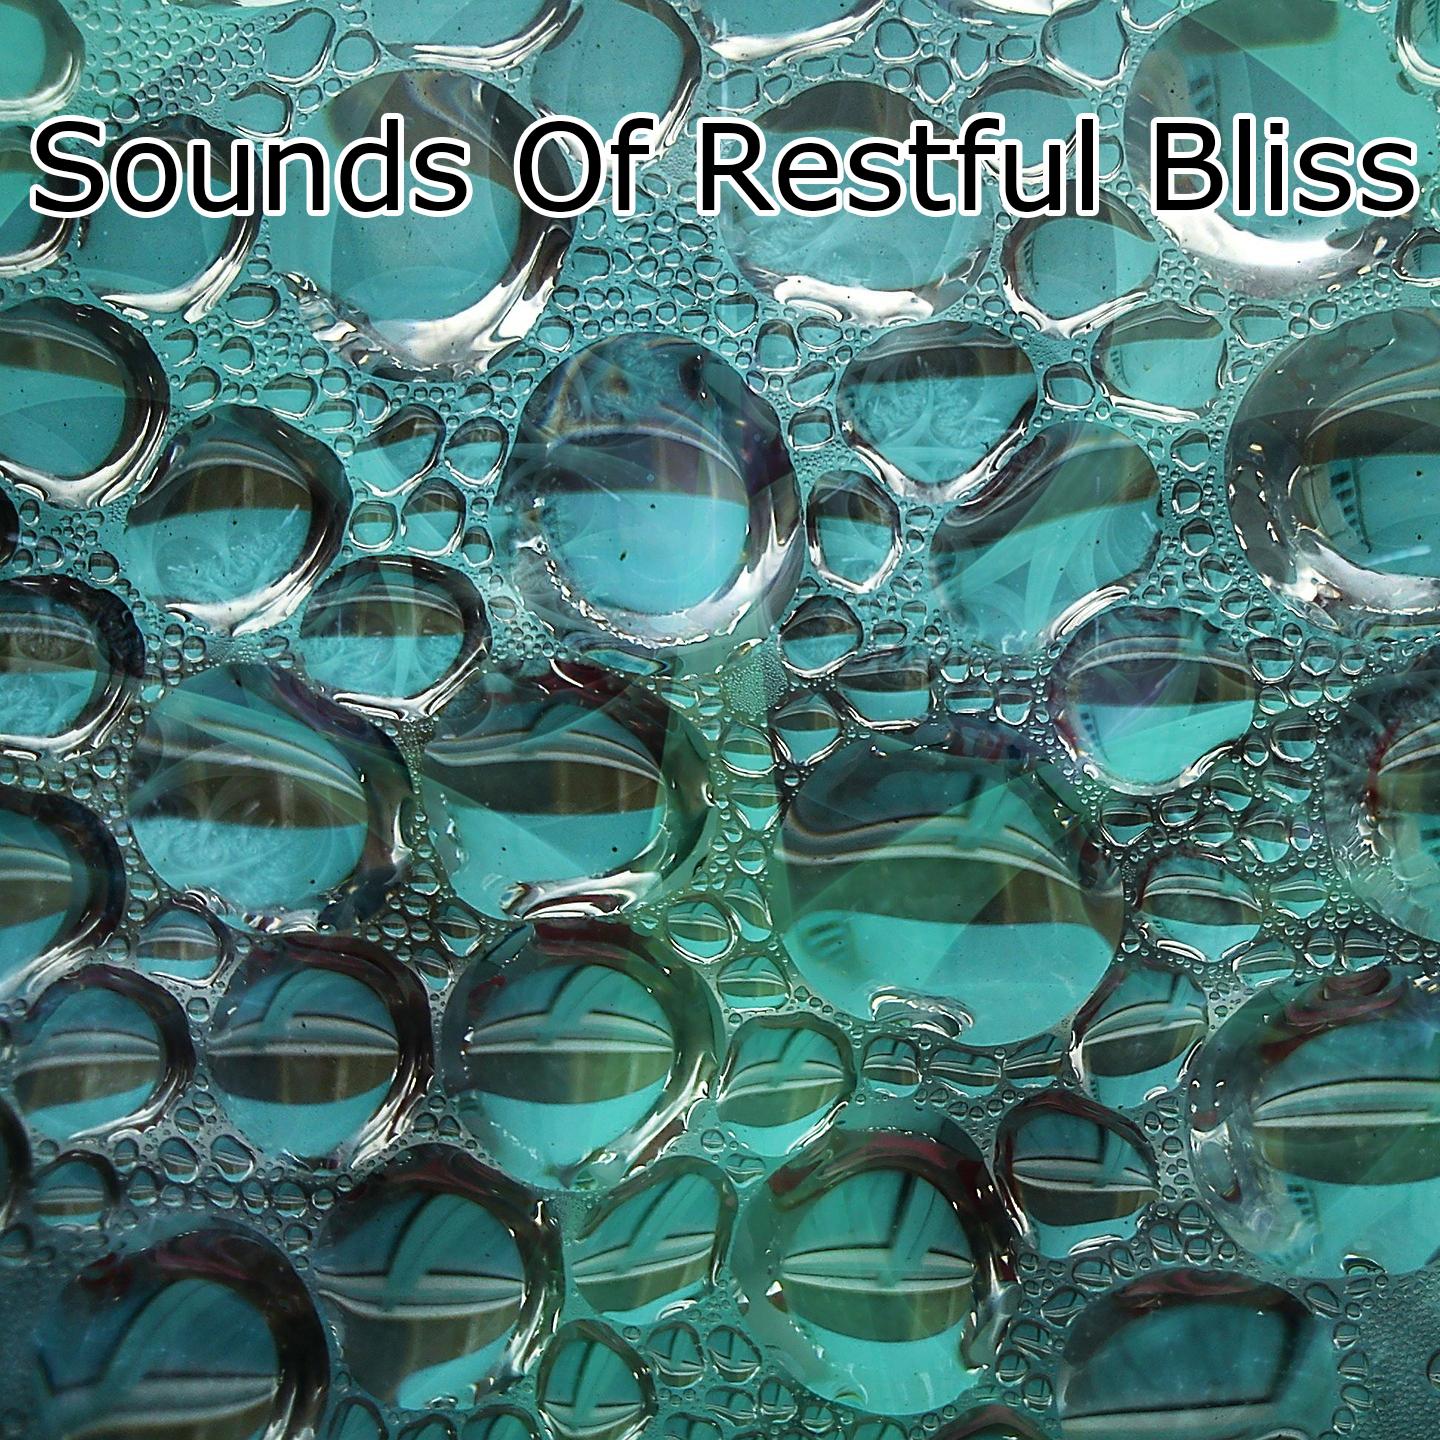 Sounds of Restful Bliss